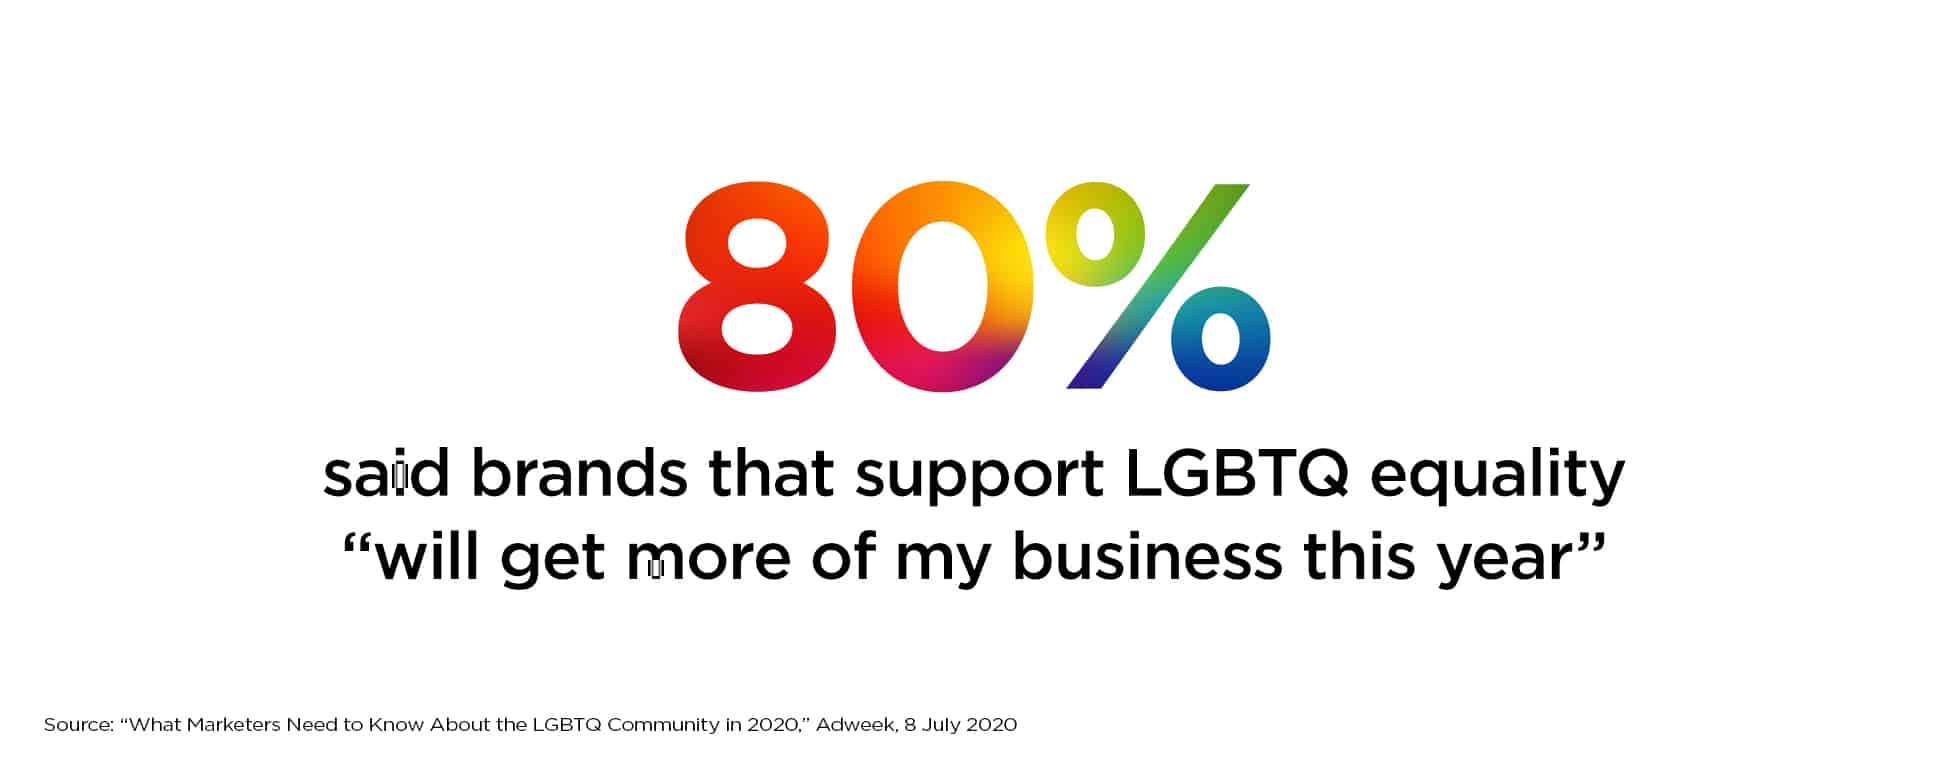 80% said brands that support LGBTQ equality "will get more of my business this year"